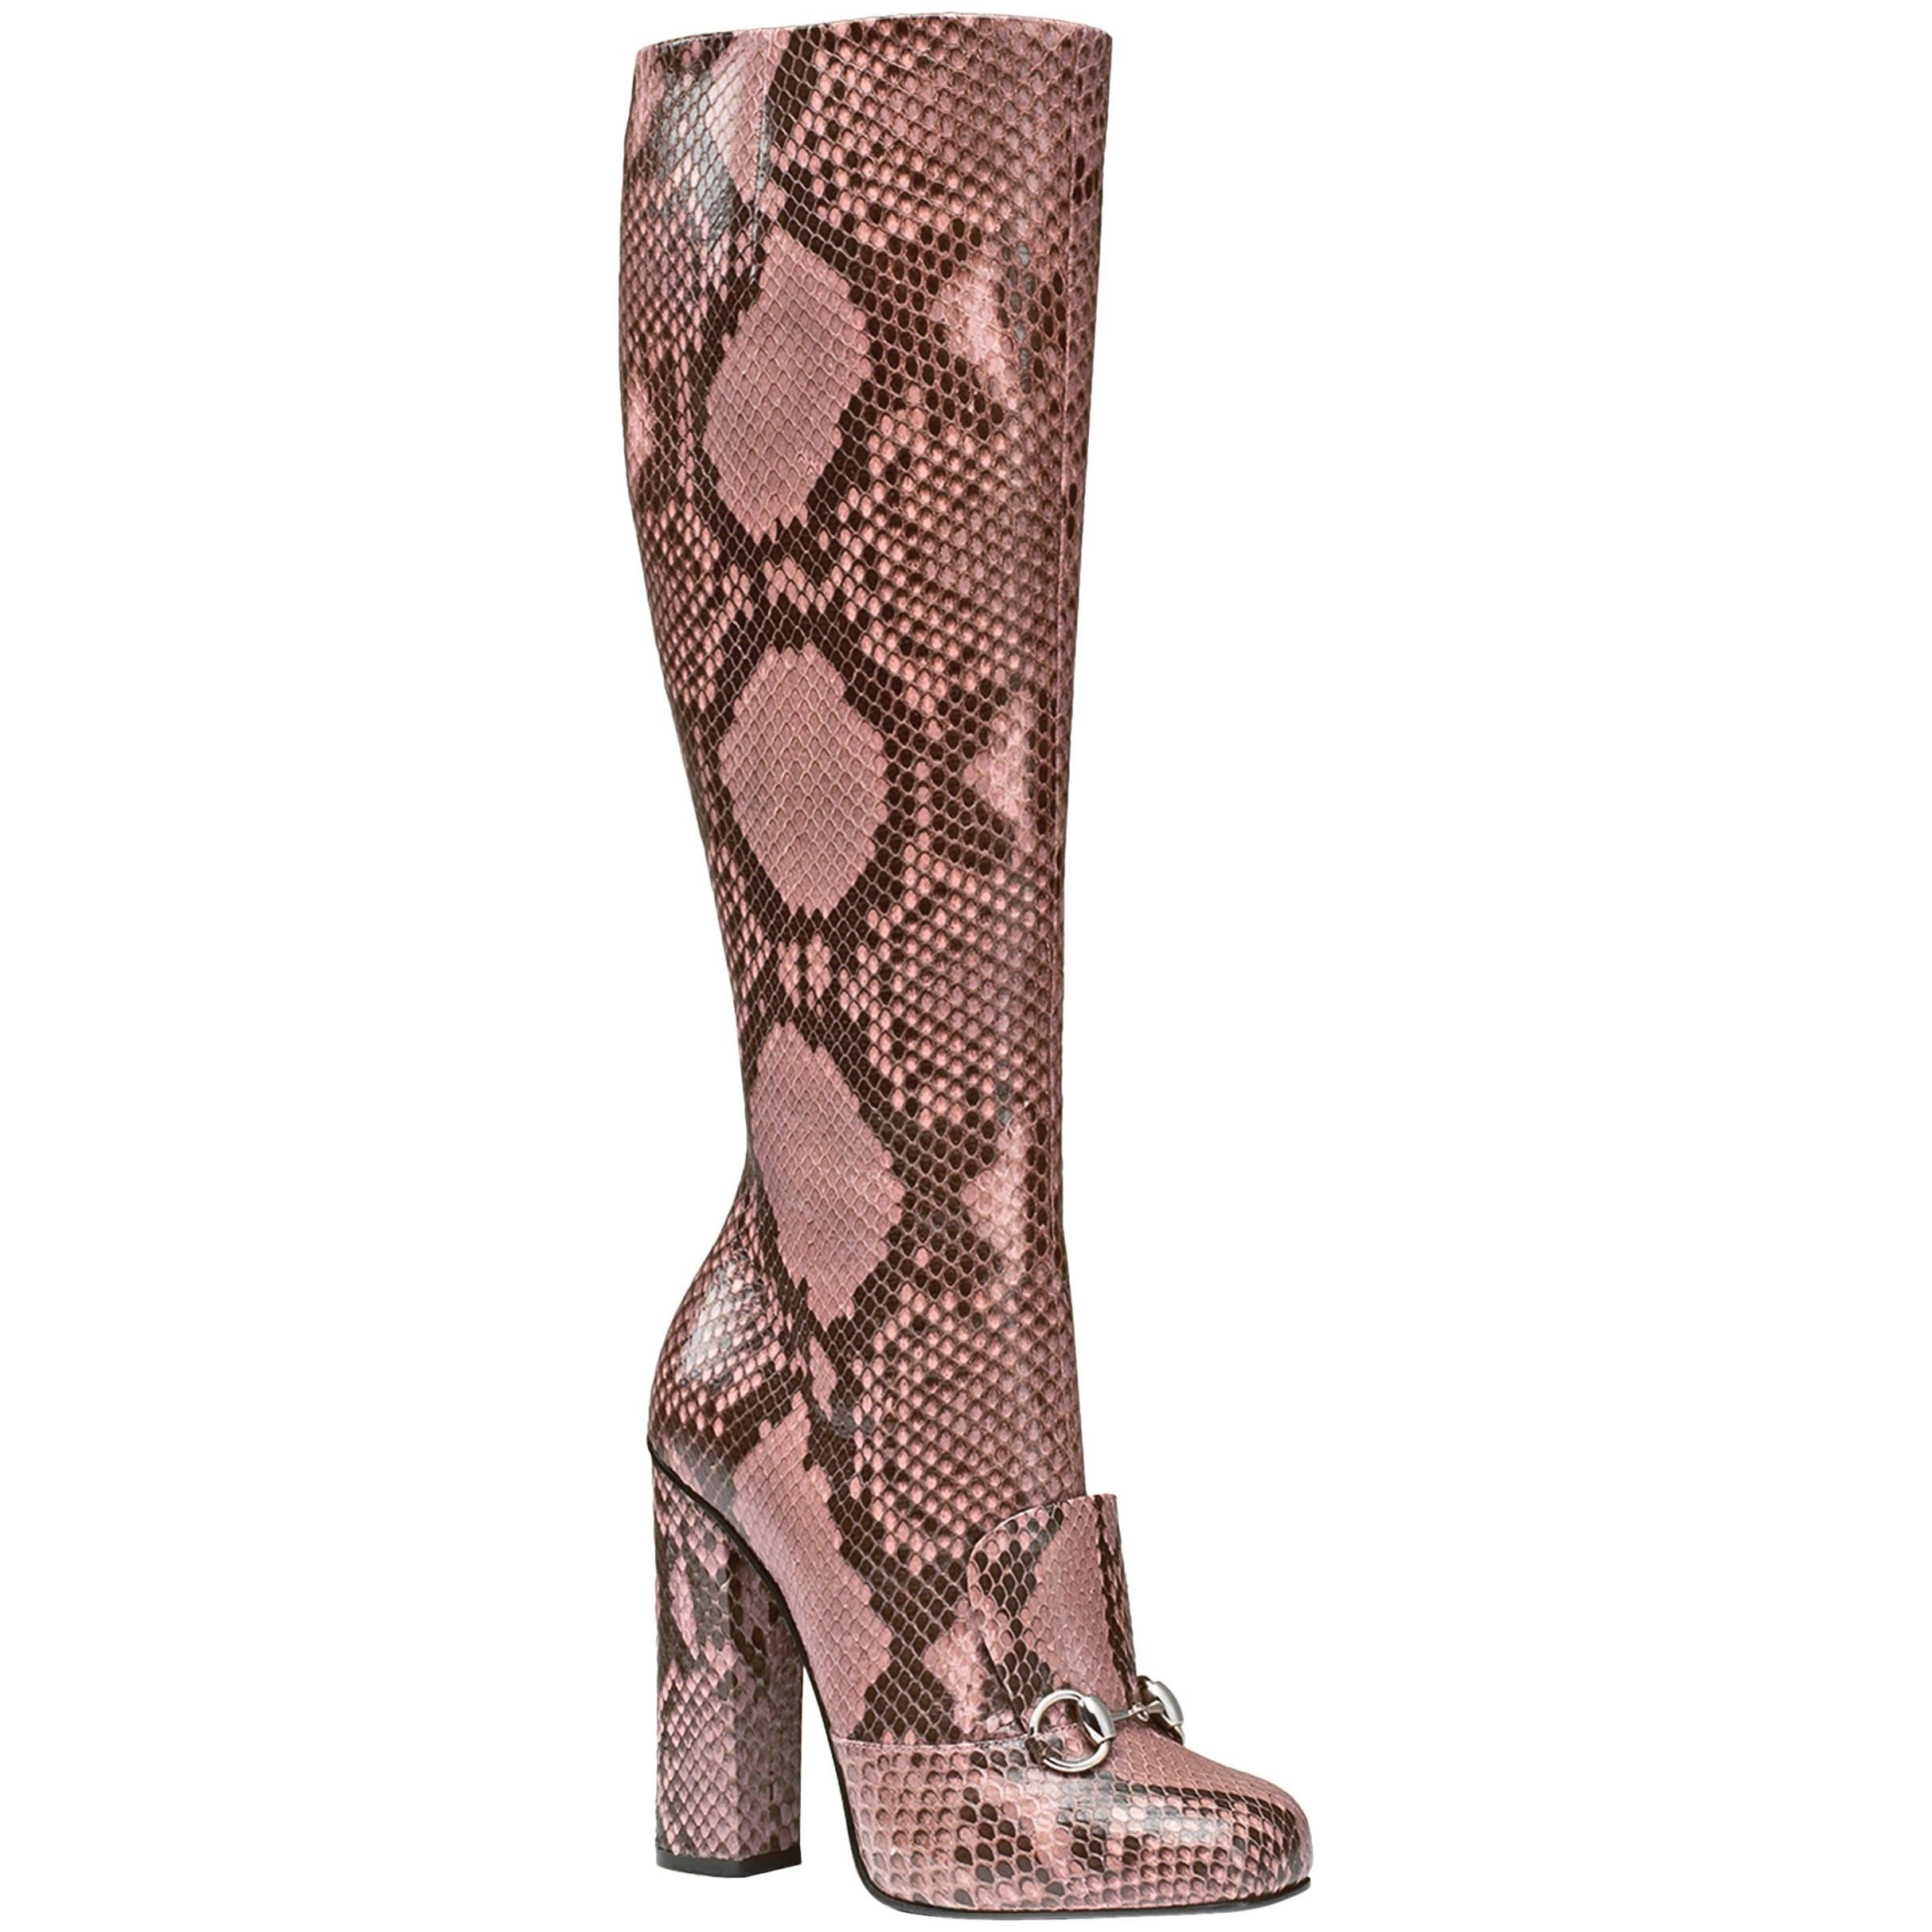 New GUCCI Campaign Python Horsebit Knee High Boots Pink 36.5 - US 7  